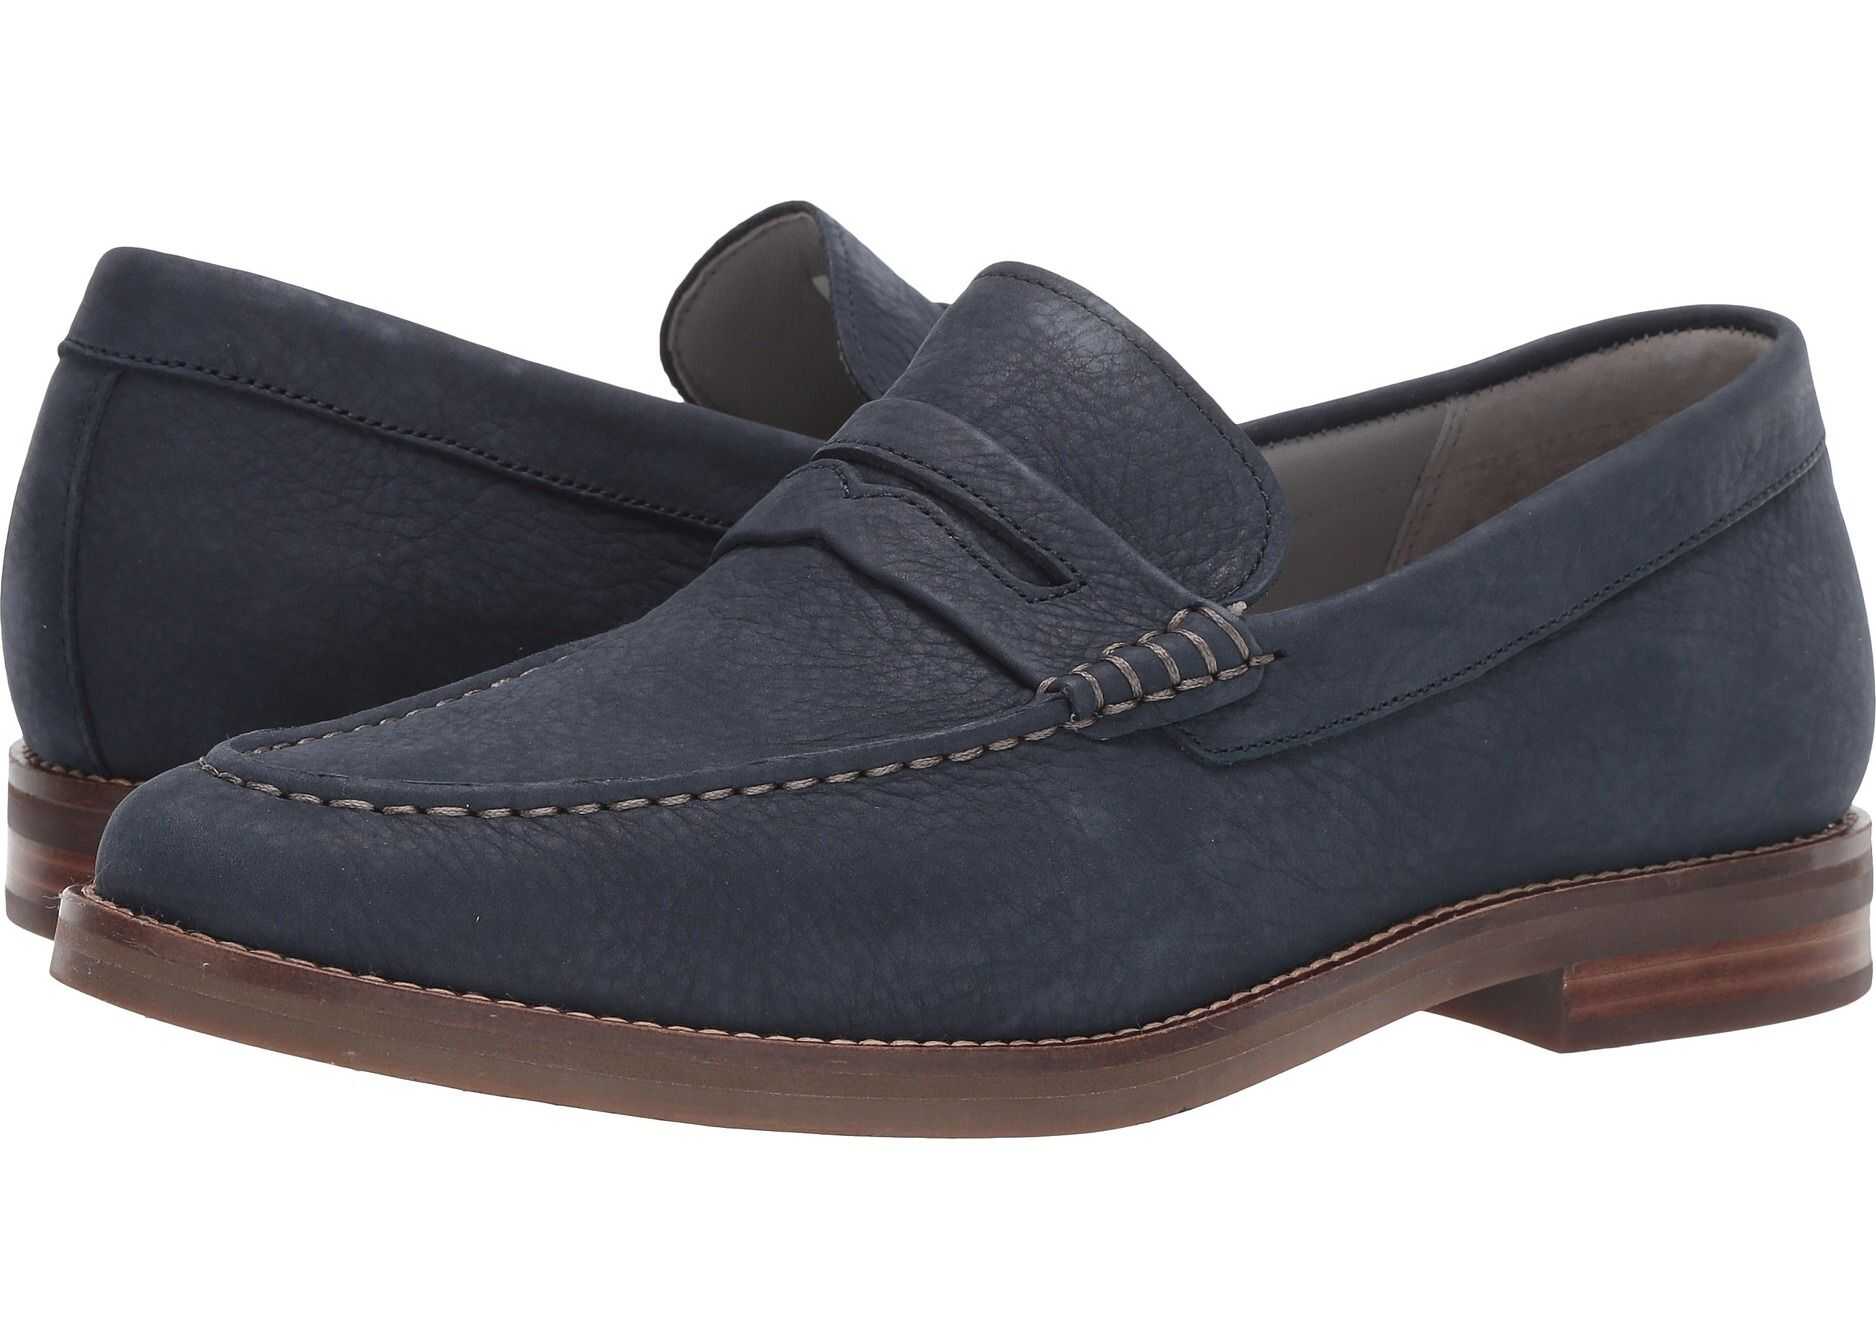 Sperry Top-Sider Gold Cup Exeter Penny Loafer Navy